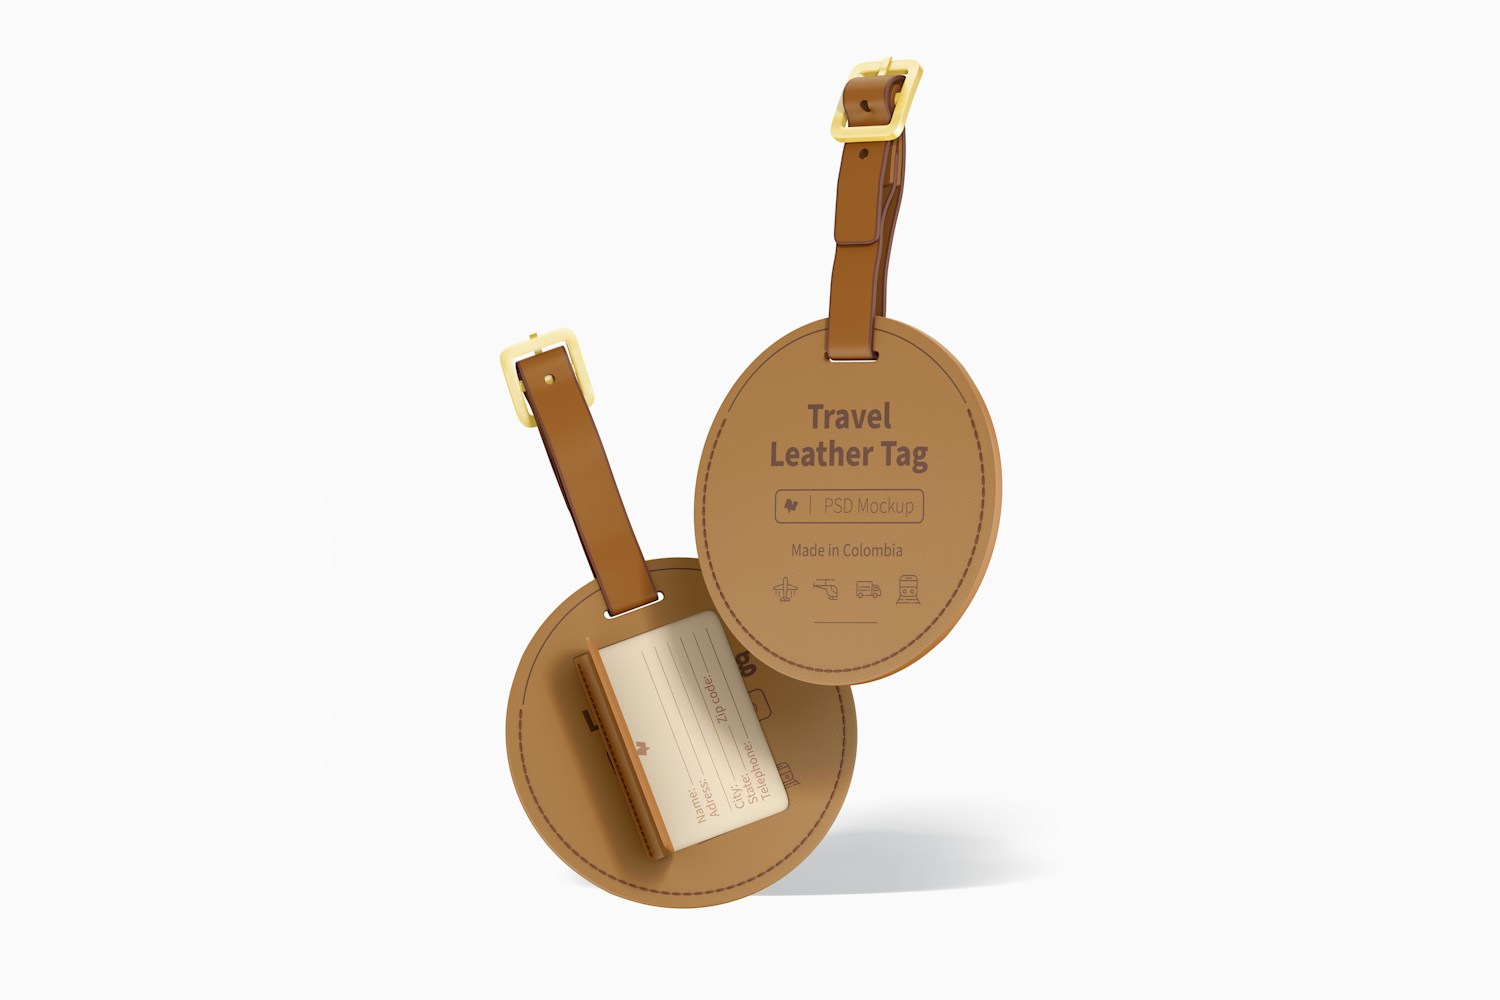 Round Travel Leather Tags Mockup, Floating